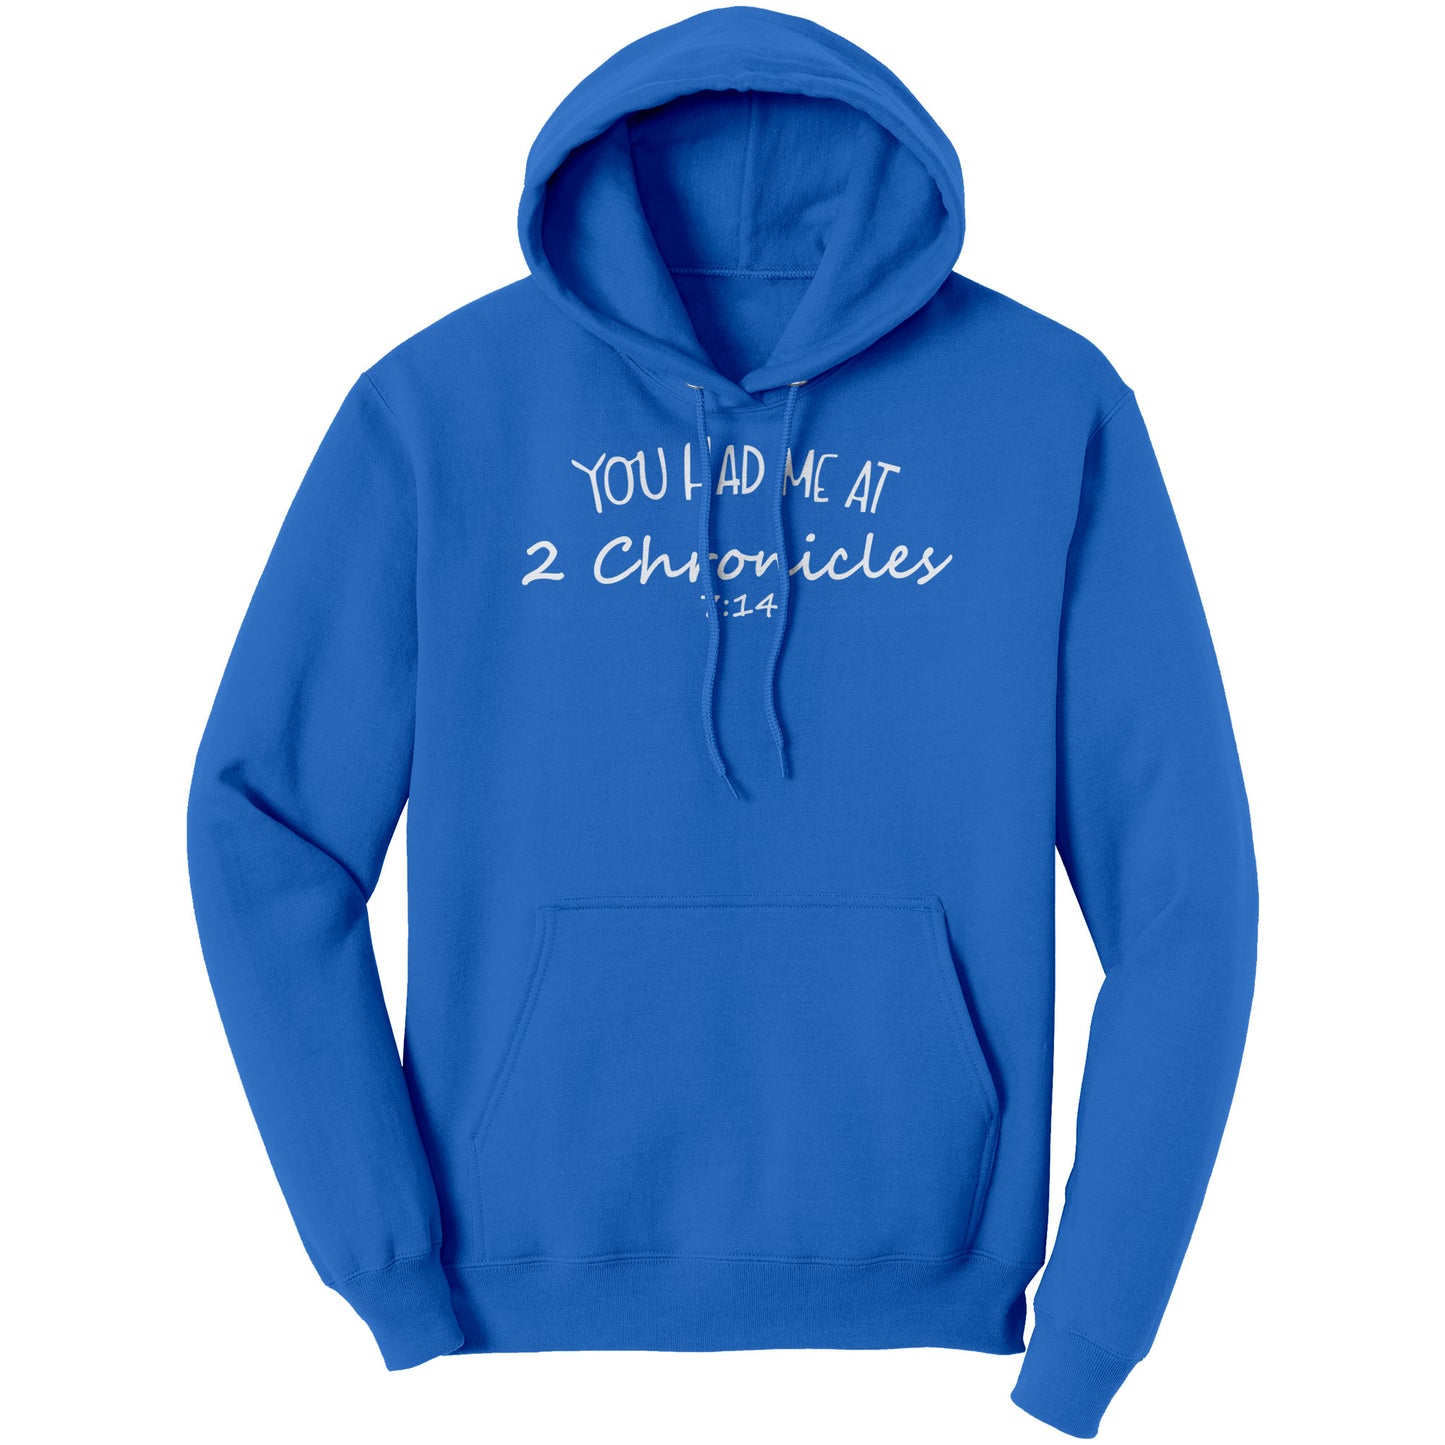 You Had Me At 2 Chronicles 7:14 Hoodie Part 2